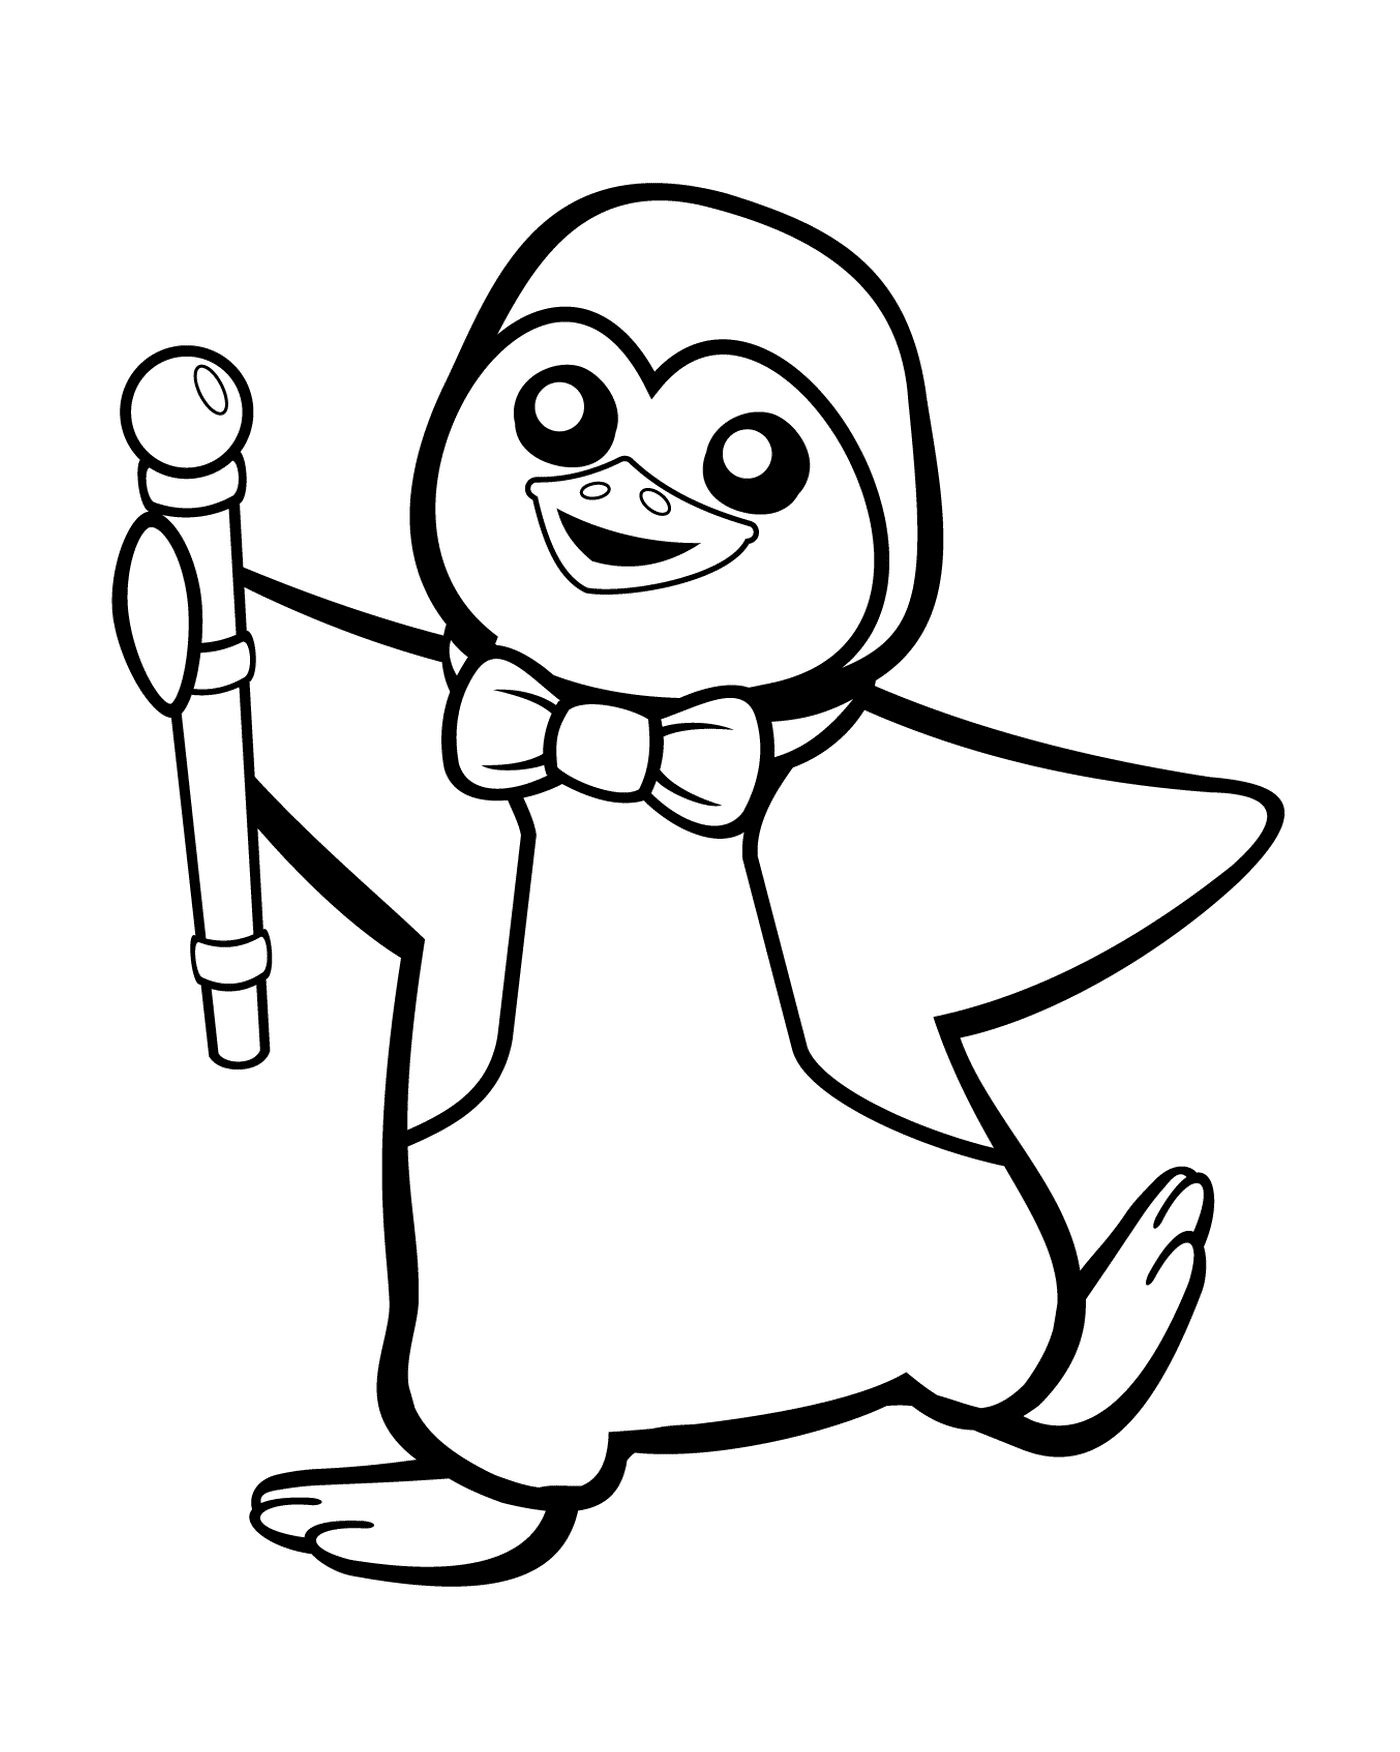  A penguin holding a cane 